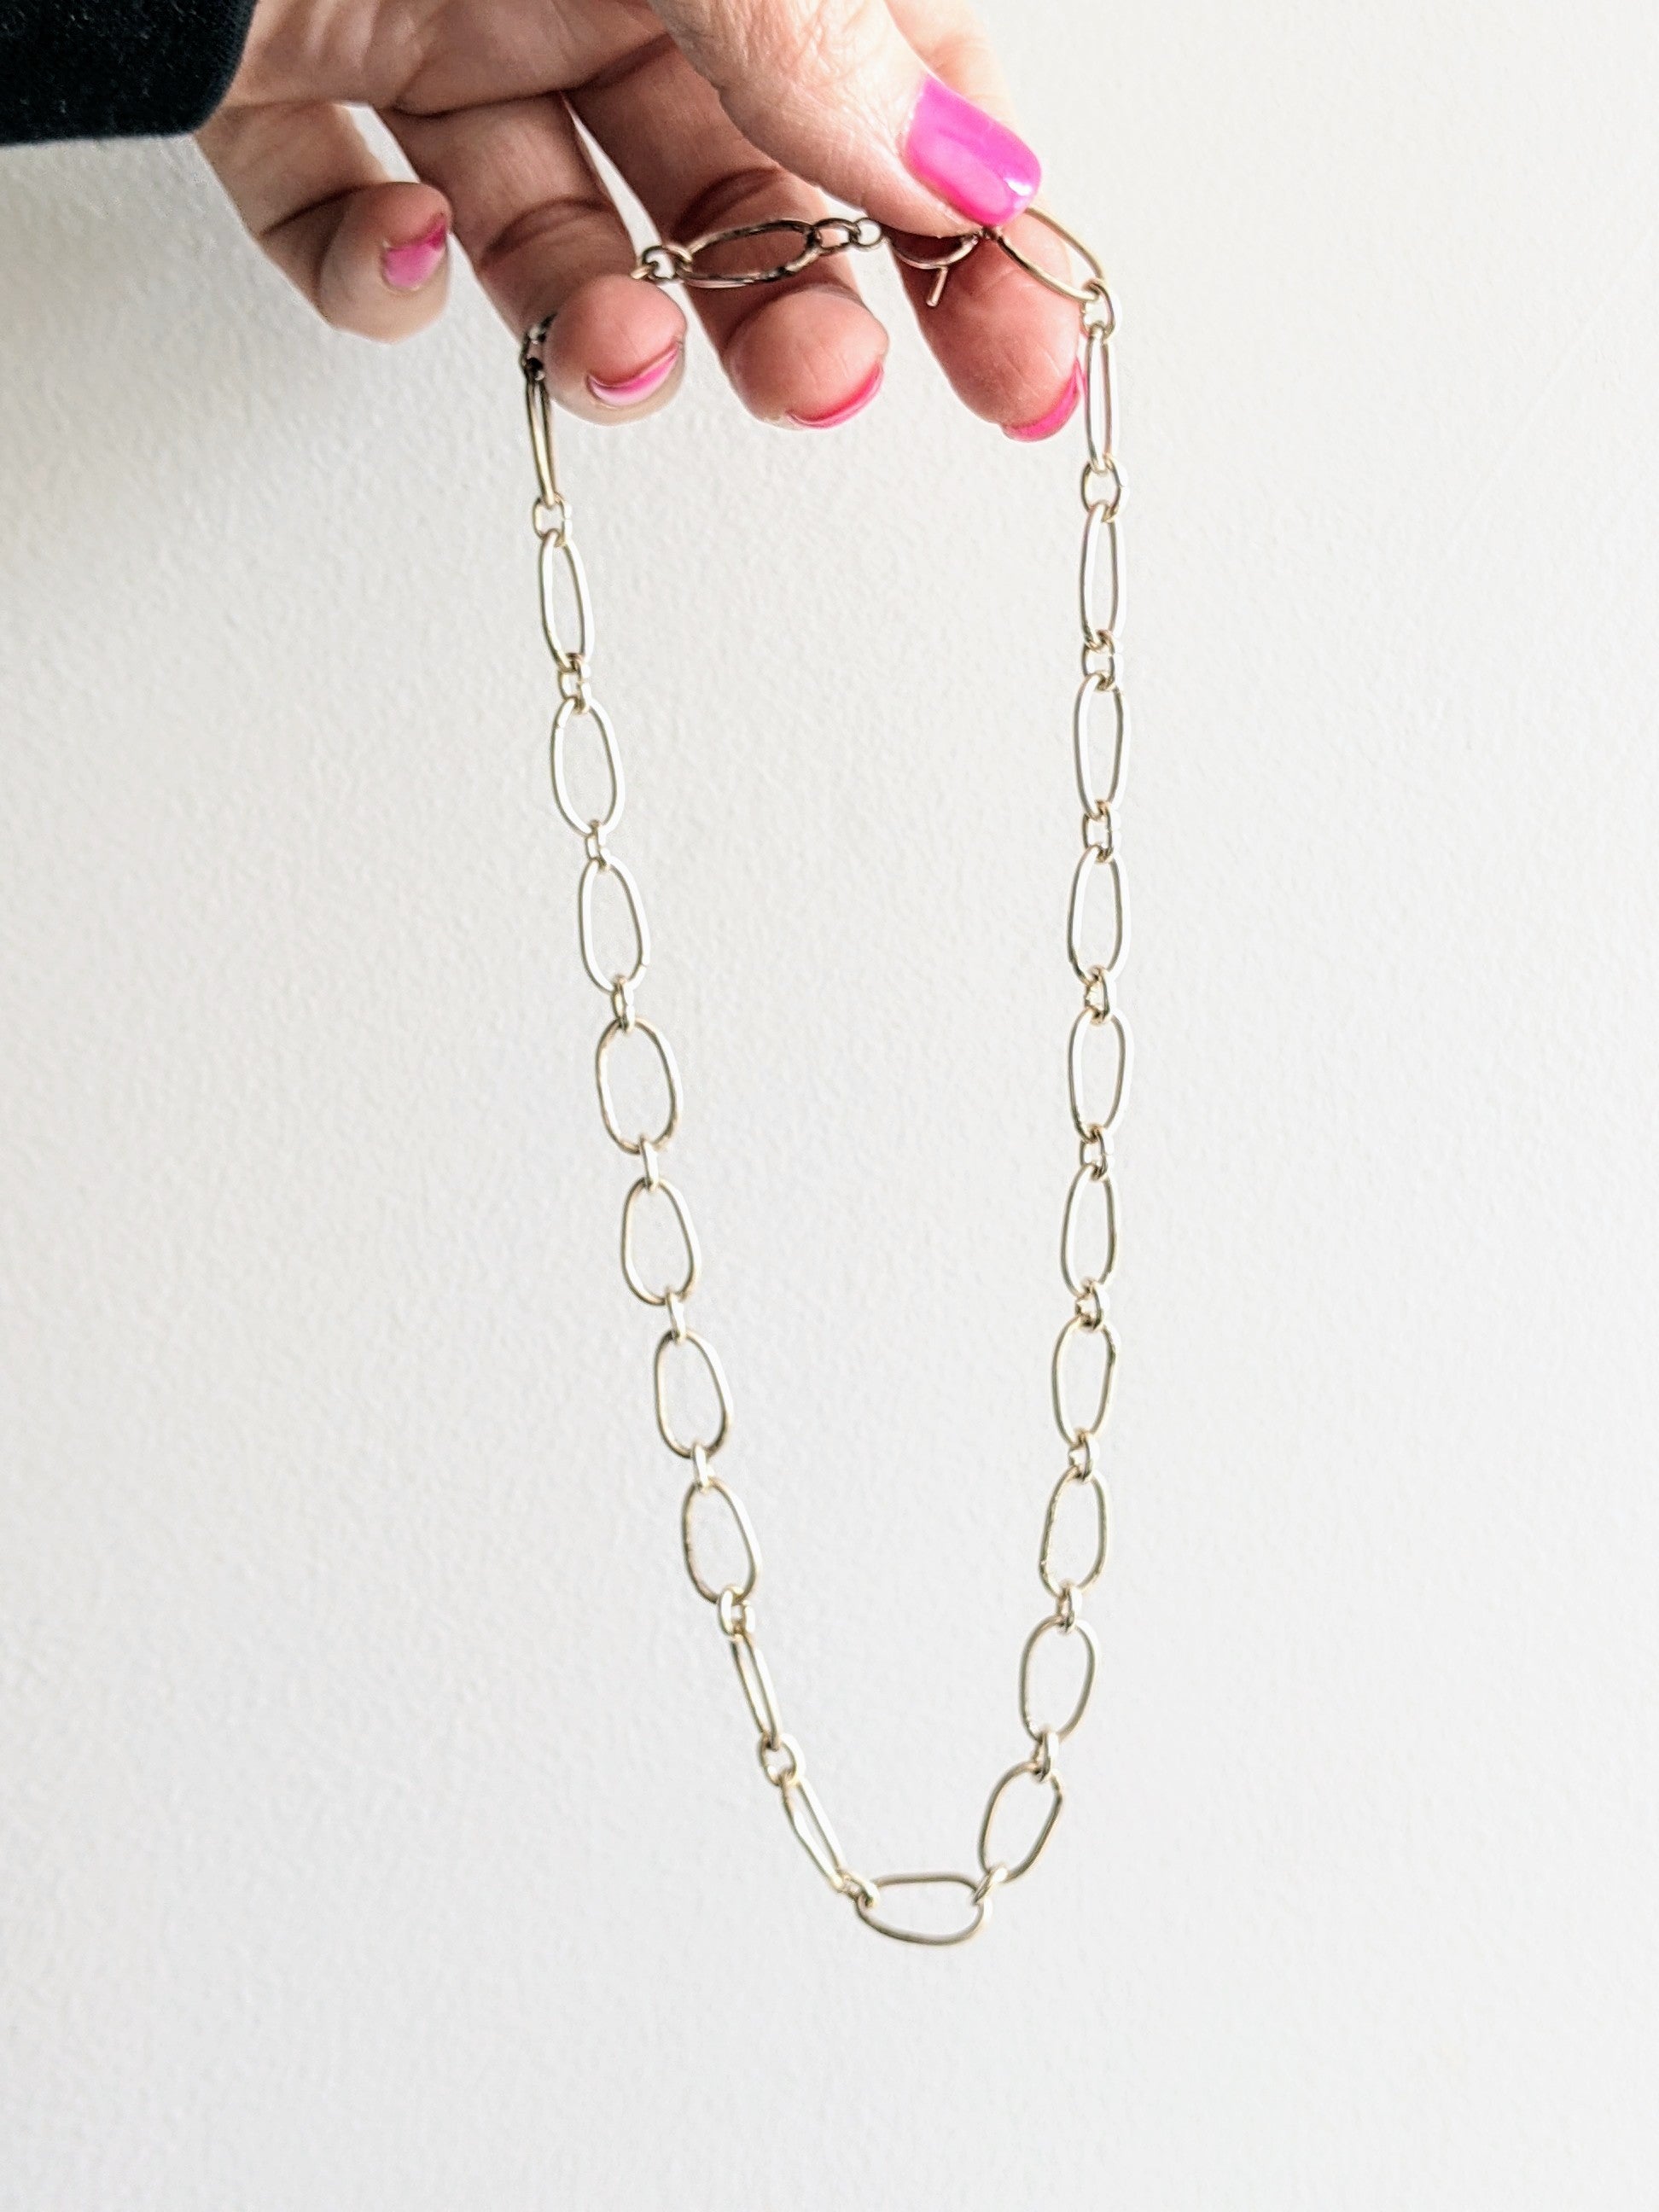 Radiant Linkage Necklace in Sterling Silver